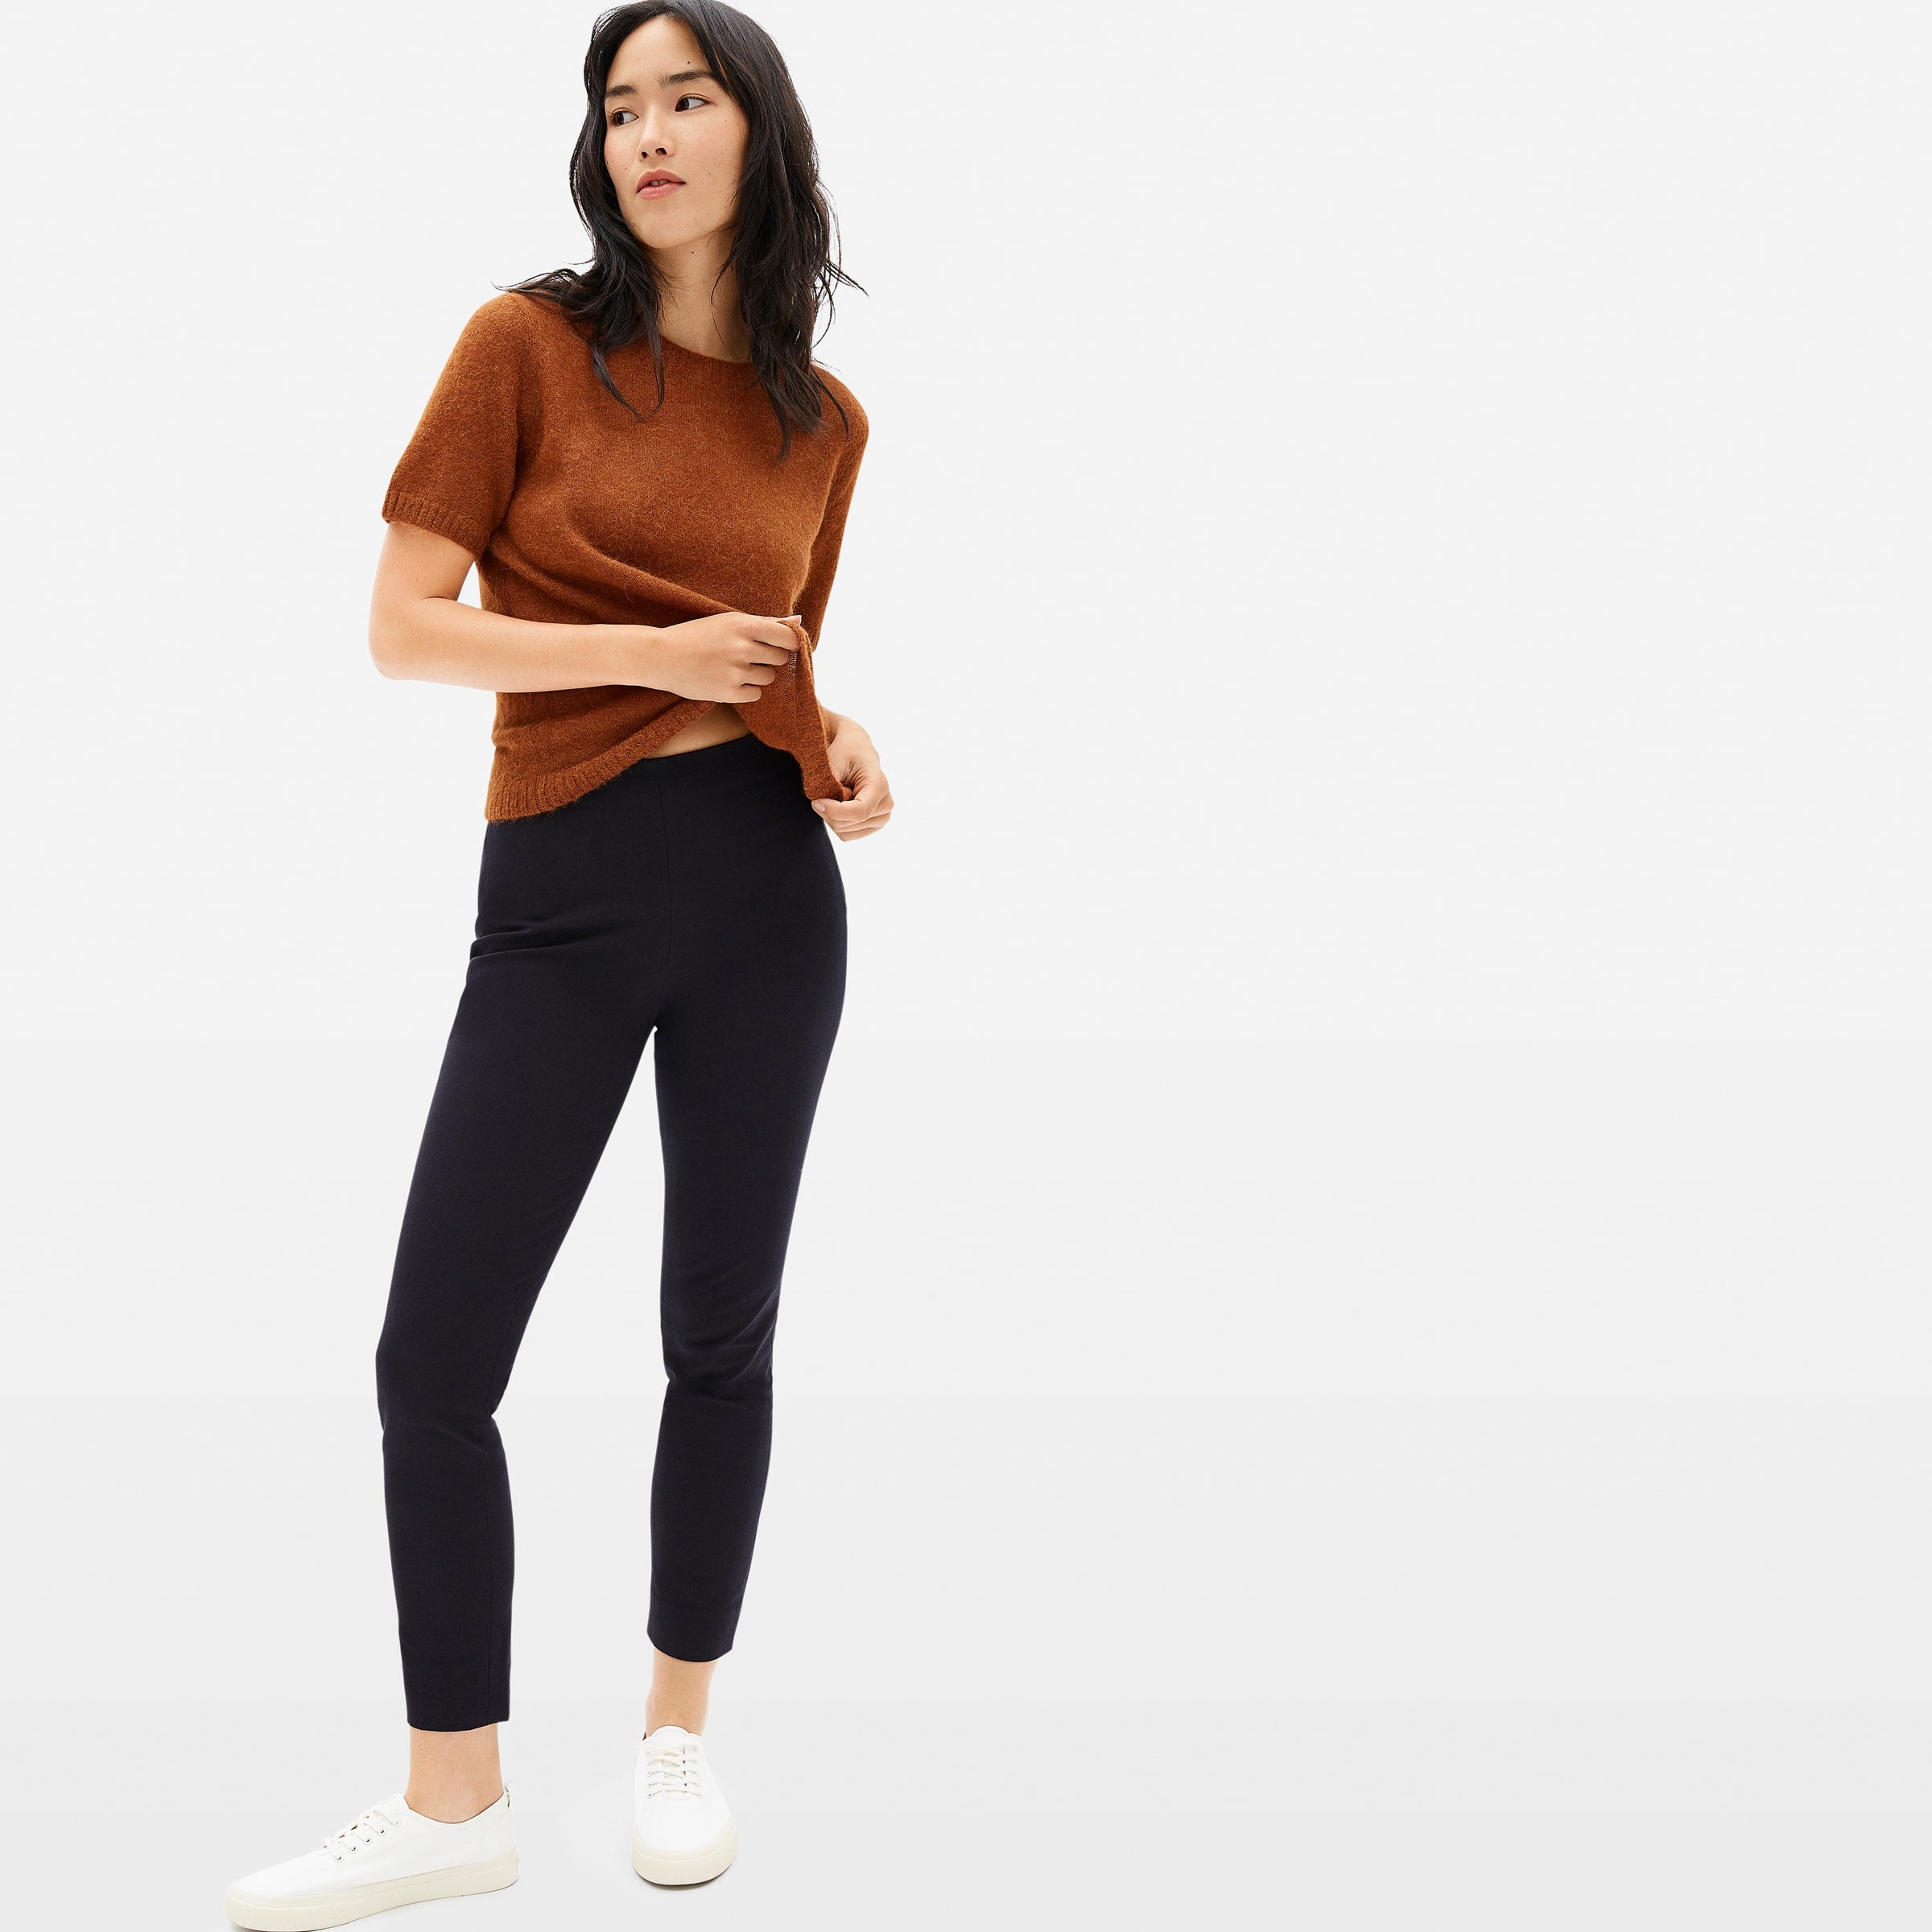 Everlane + The Stretch Cotton Pant